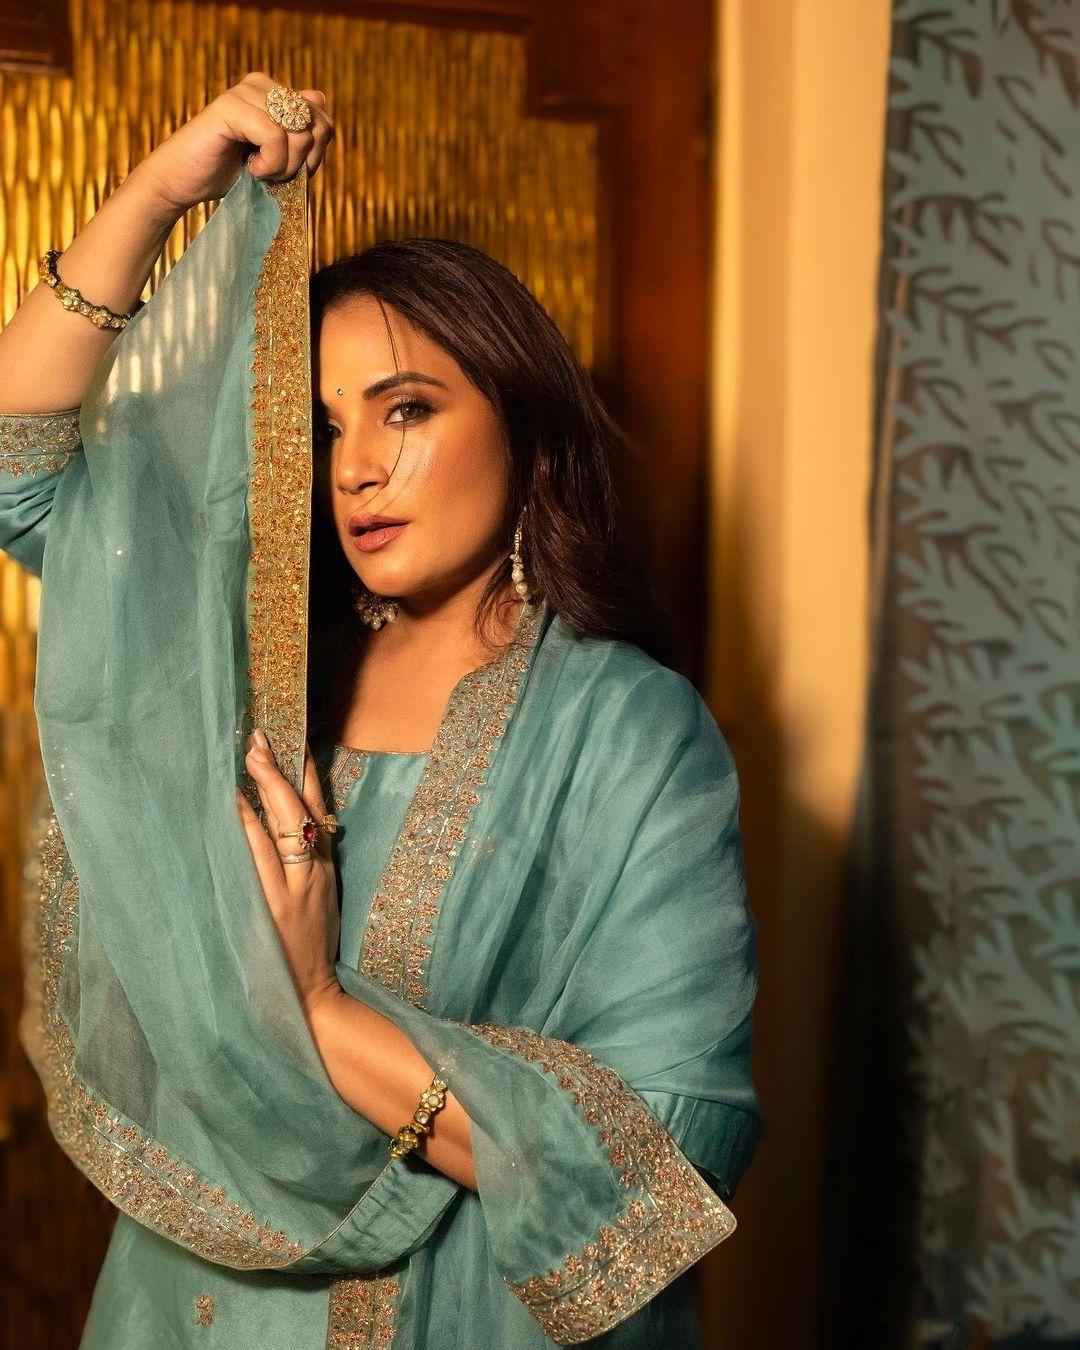 Richa Chadha's interesting sharara suit is a great pick if you are a wedding guest